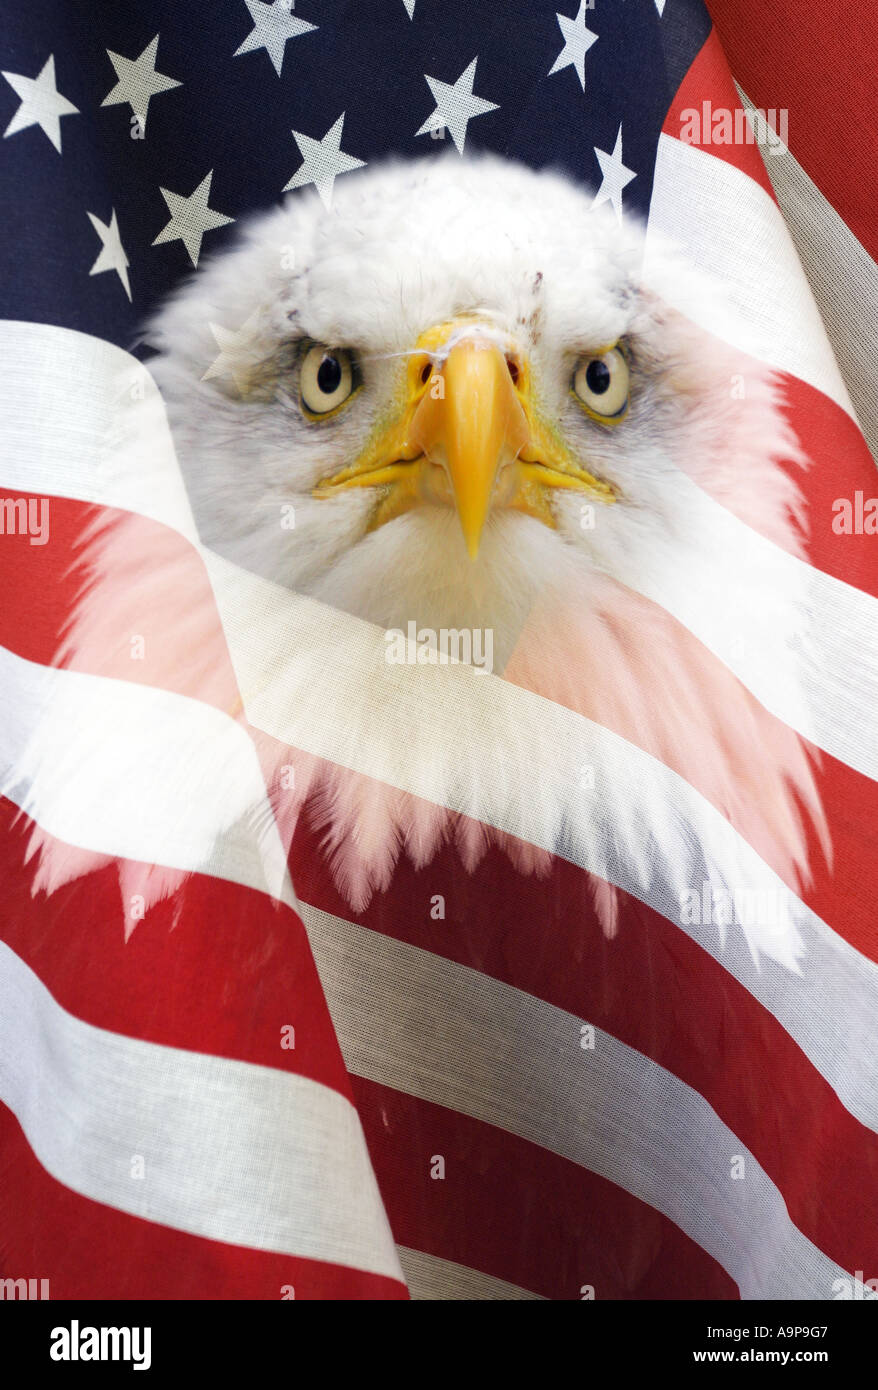 United states stars and stripes flag with bald headed eagle superimposed over it Stock Photo